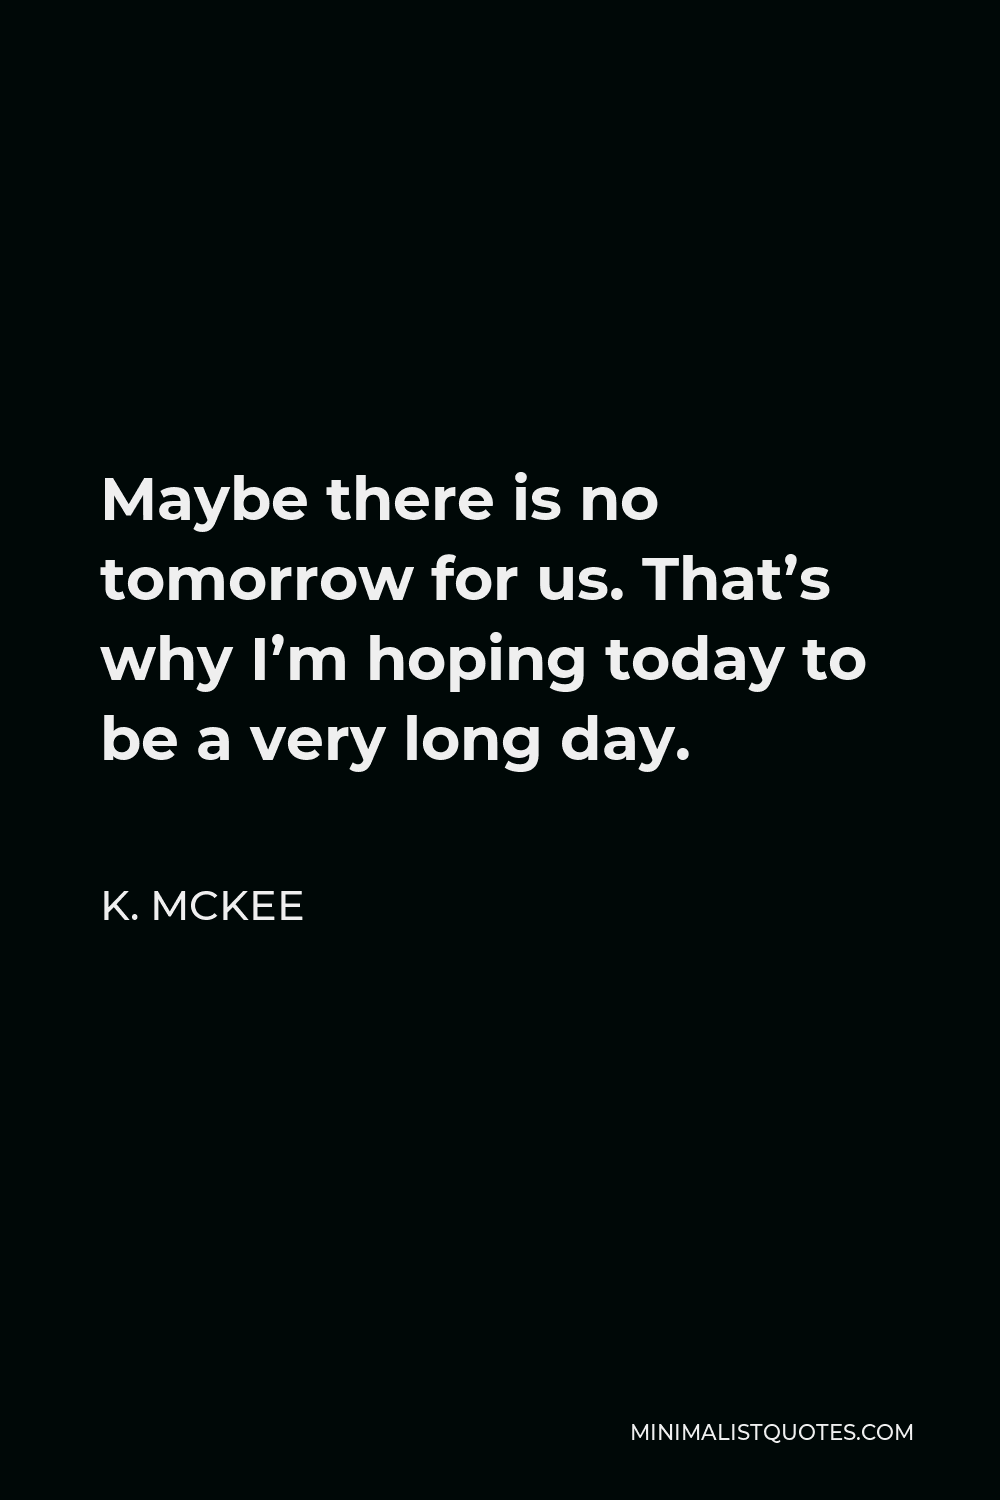 K. Mckee Quote - Maybe there is no tomorrow for us. That’s why I’m hoping today to be a very long day.